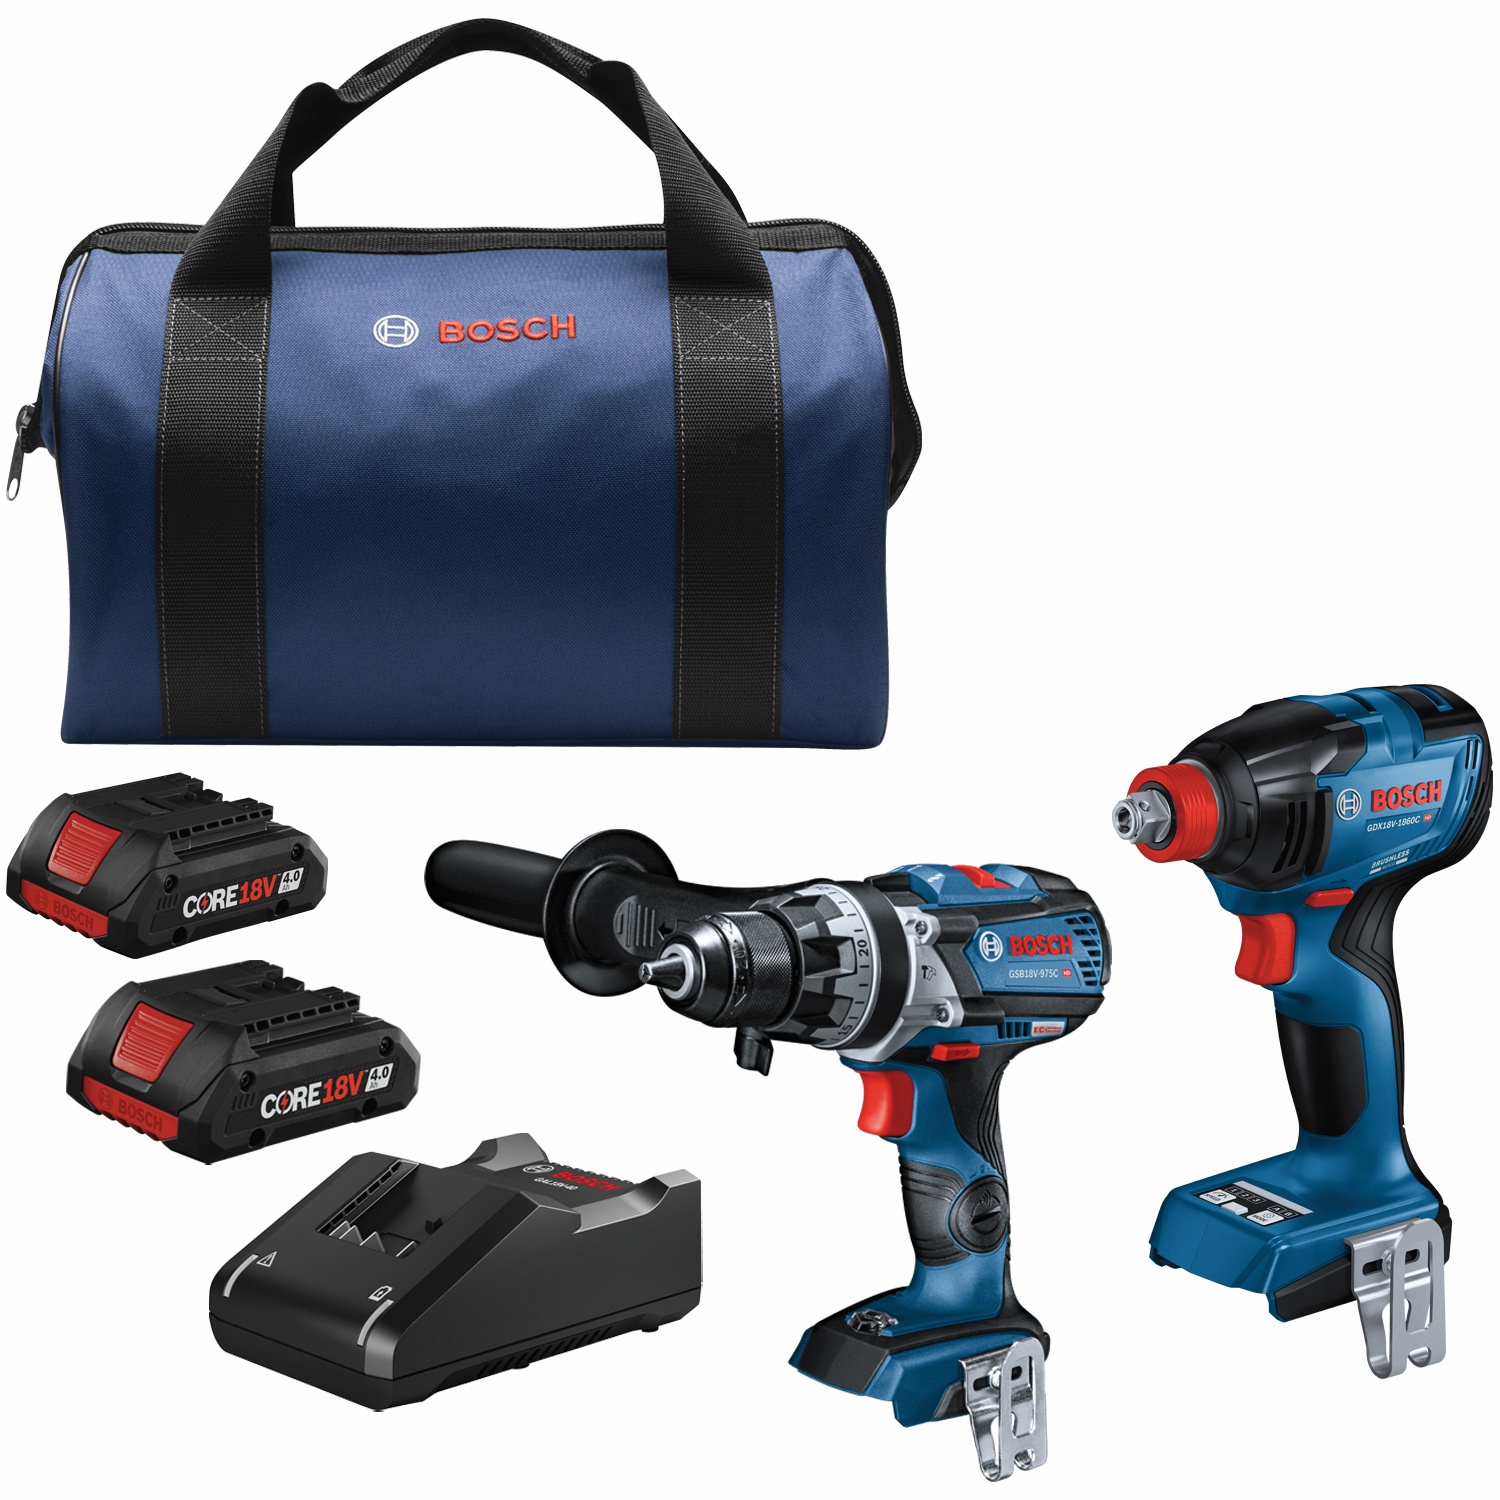 Bosch 18V 2-Tool Combo Kit W/ Connected-Ready Freak Two-In-One Impact  Driver & 1/2 Hammer Drill W/ Batteries - White Cap